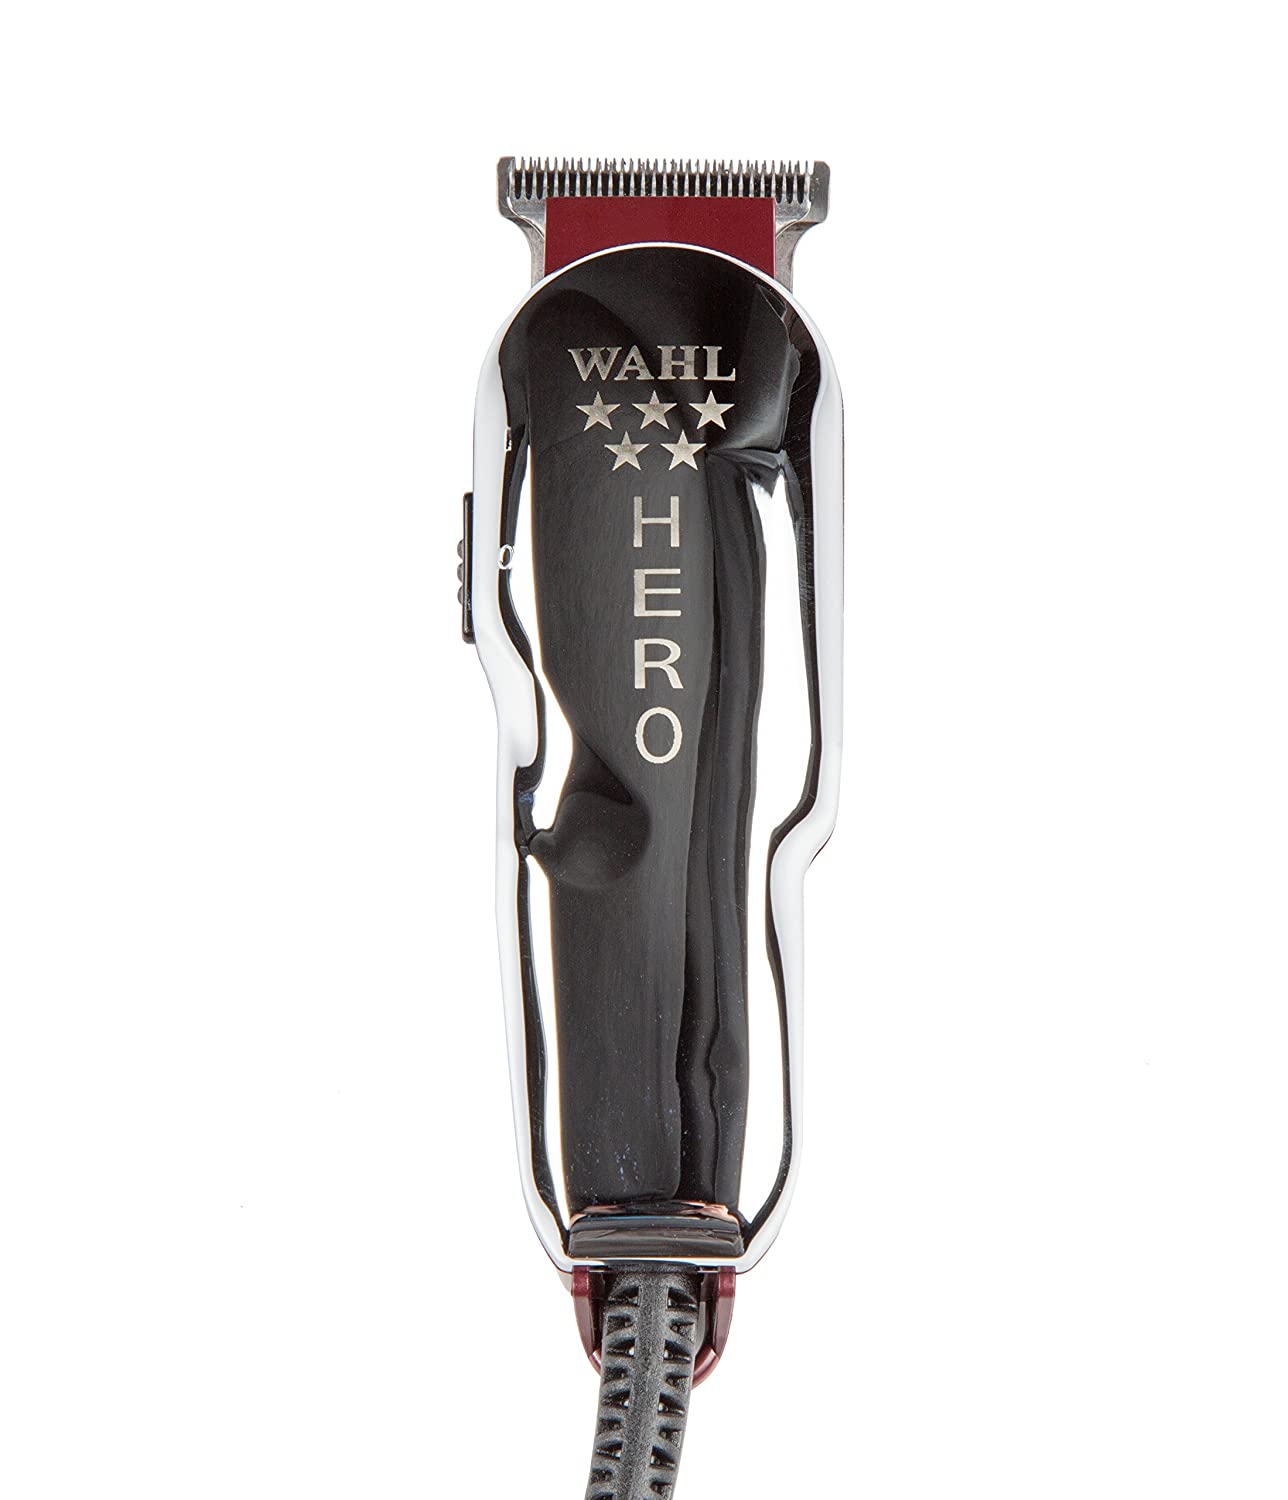 Wahl Hero 5 Star Professional Corded Trimmer, 08991-727